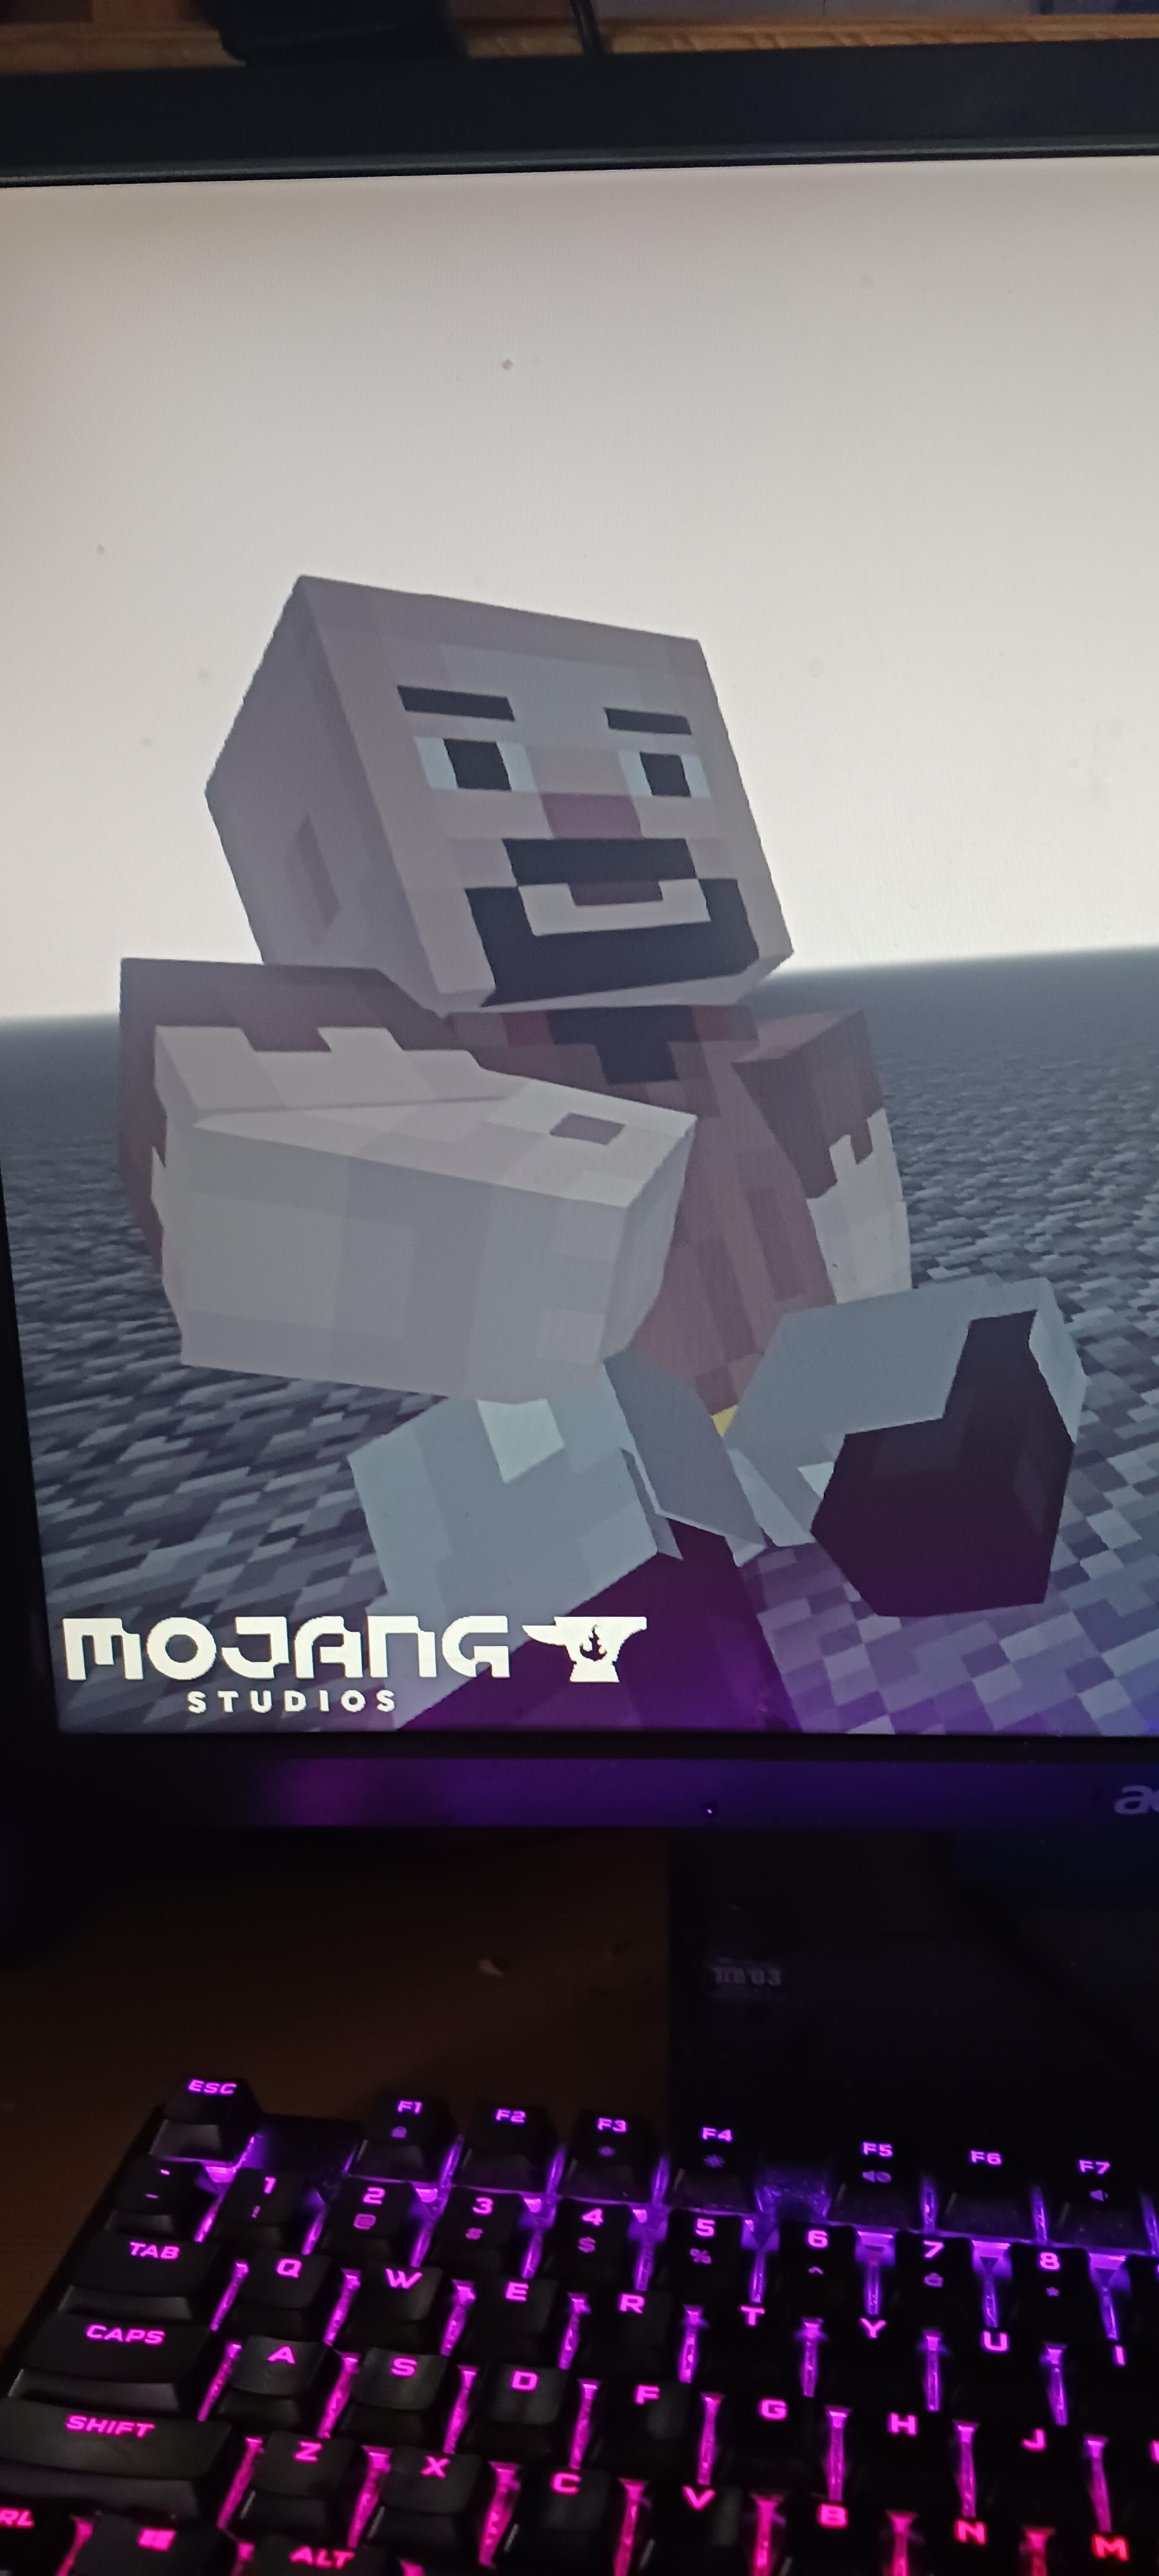 Minecraft Memes - You Call This 101 Observing Stars In The Universe But I Call It 49 Mining Quarried Stones In A Video Game